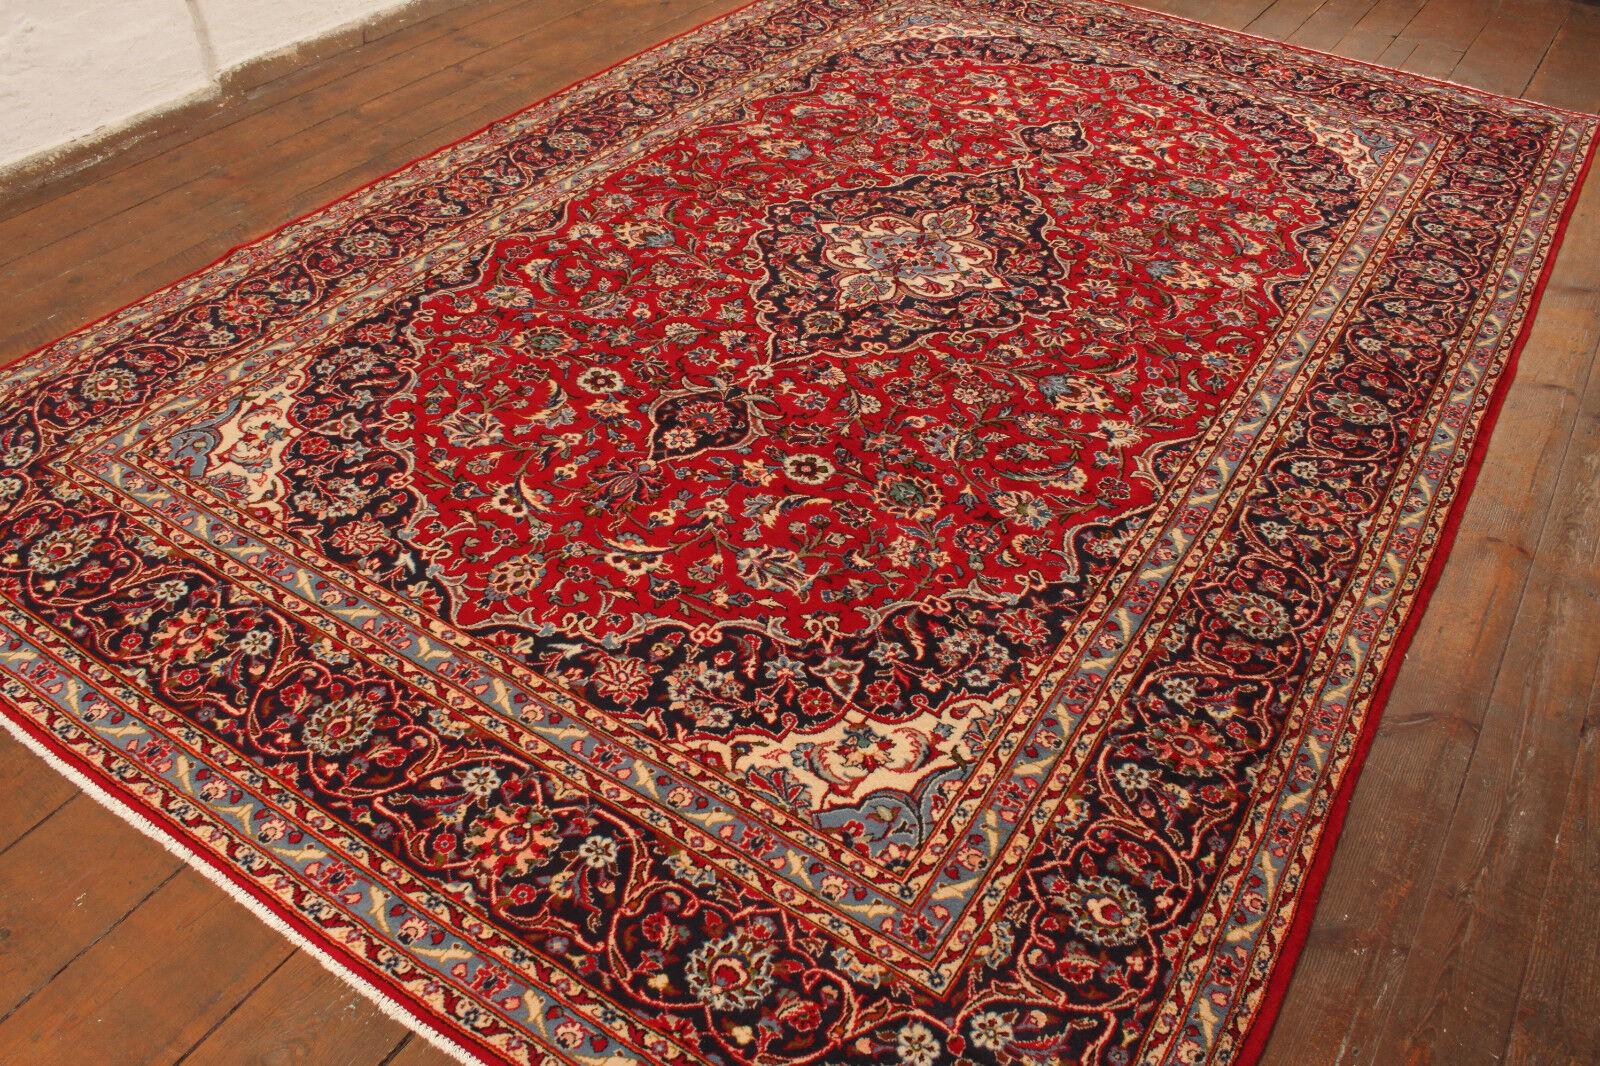 Handmade Vintage Persian Style Kashan Rug 7.8' x 12.3', 1980s - 1T03 In Good Condition For Sale In Bordeaux, FR